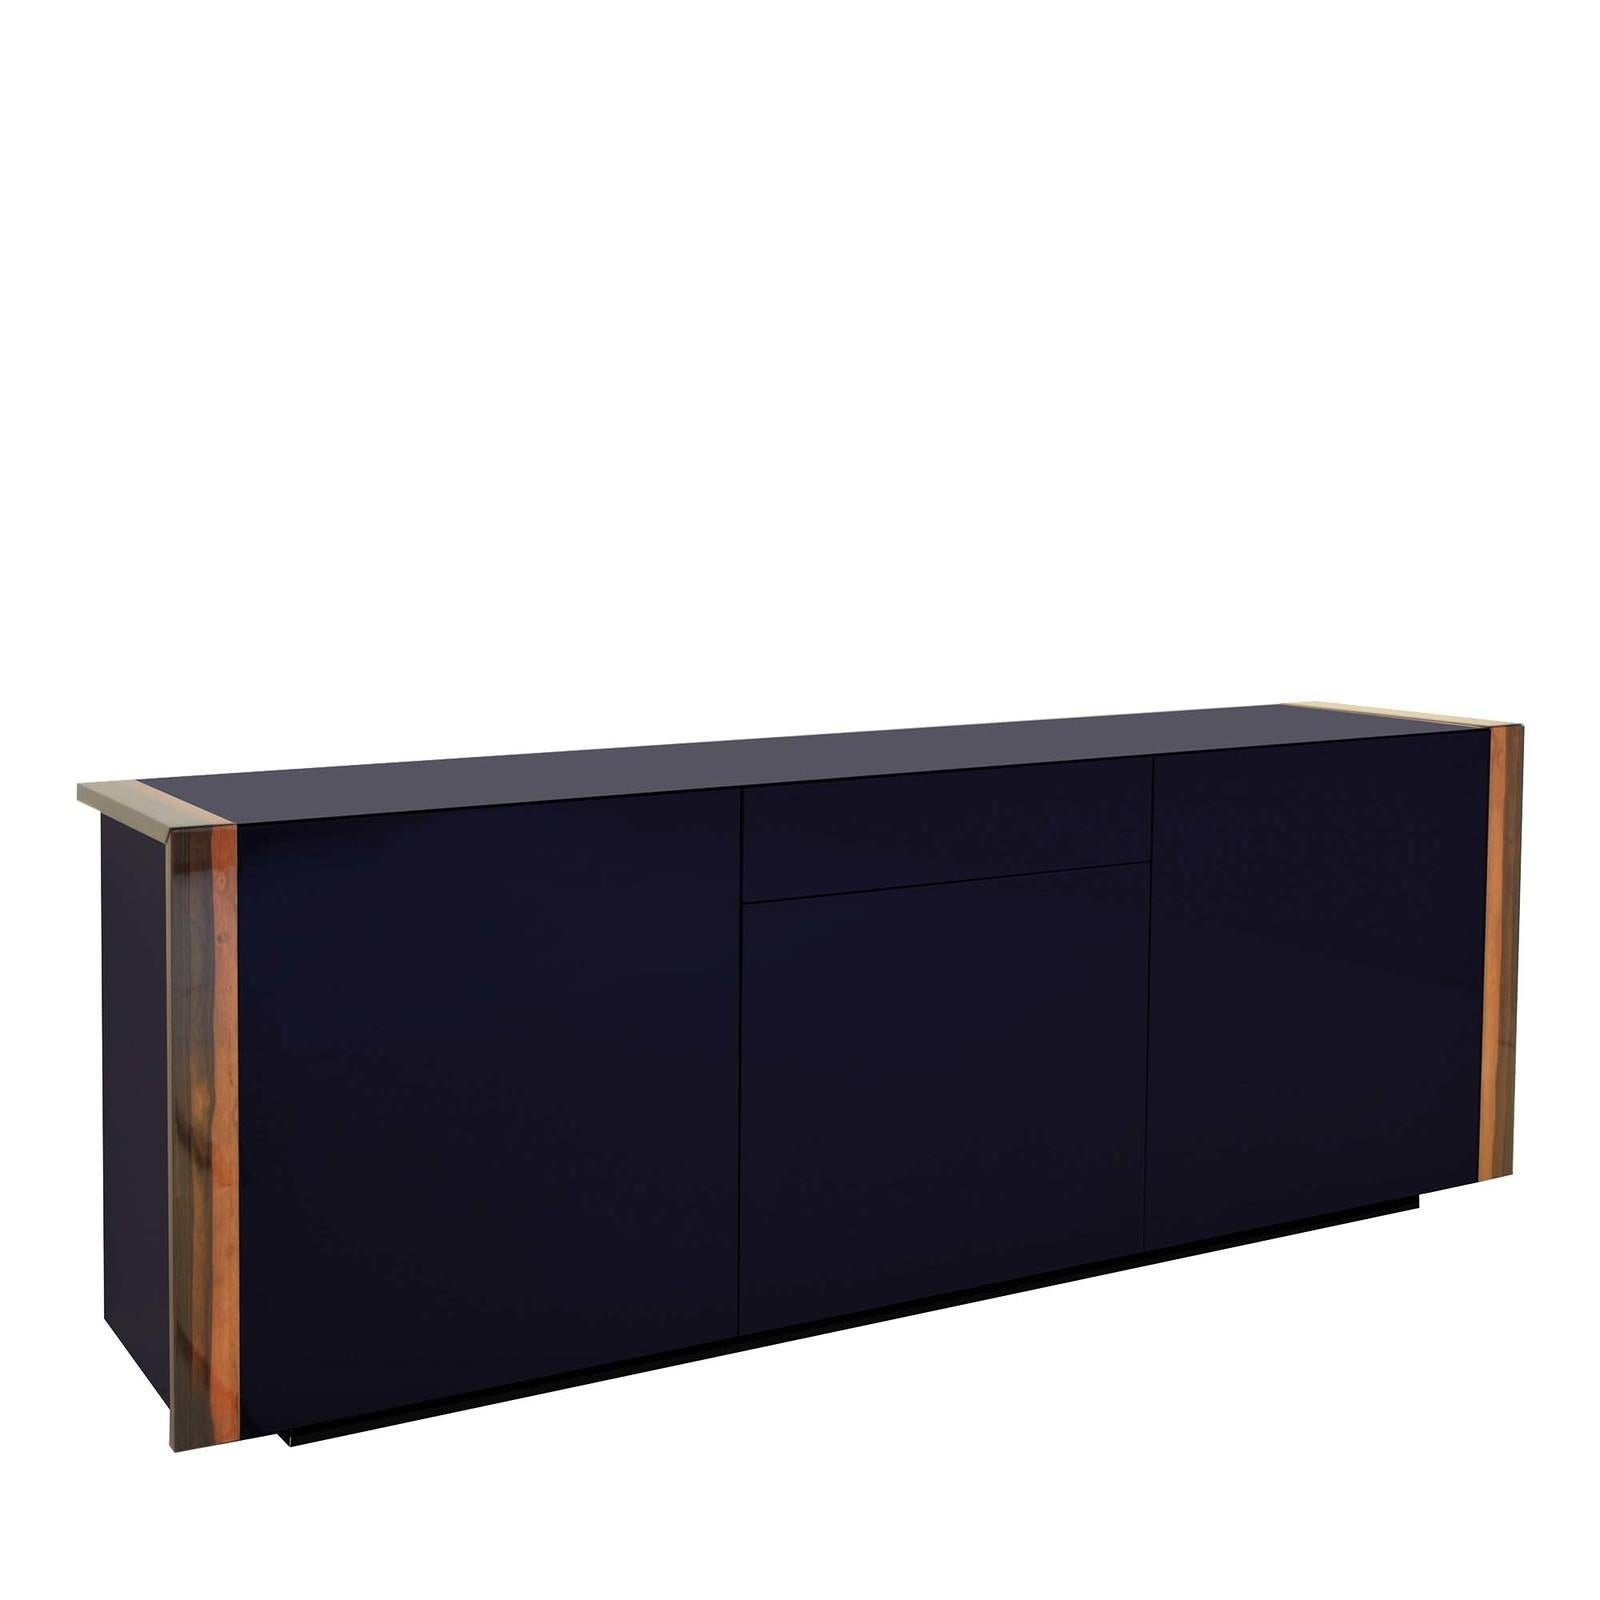 Stately yet elegant, this sideboard allows for elegant organization thanks to three compartments, each including internal shelves, and a central top drawer. The linear structure of this versatile piece is finished in indigo-lacquered polyurethane